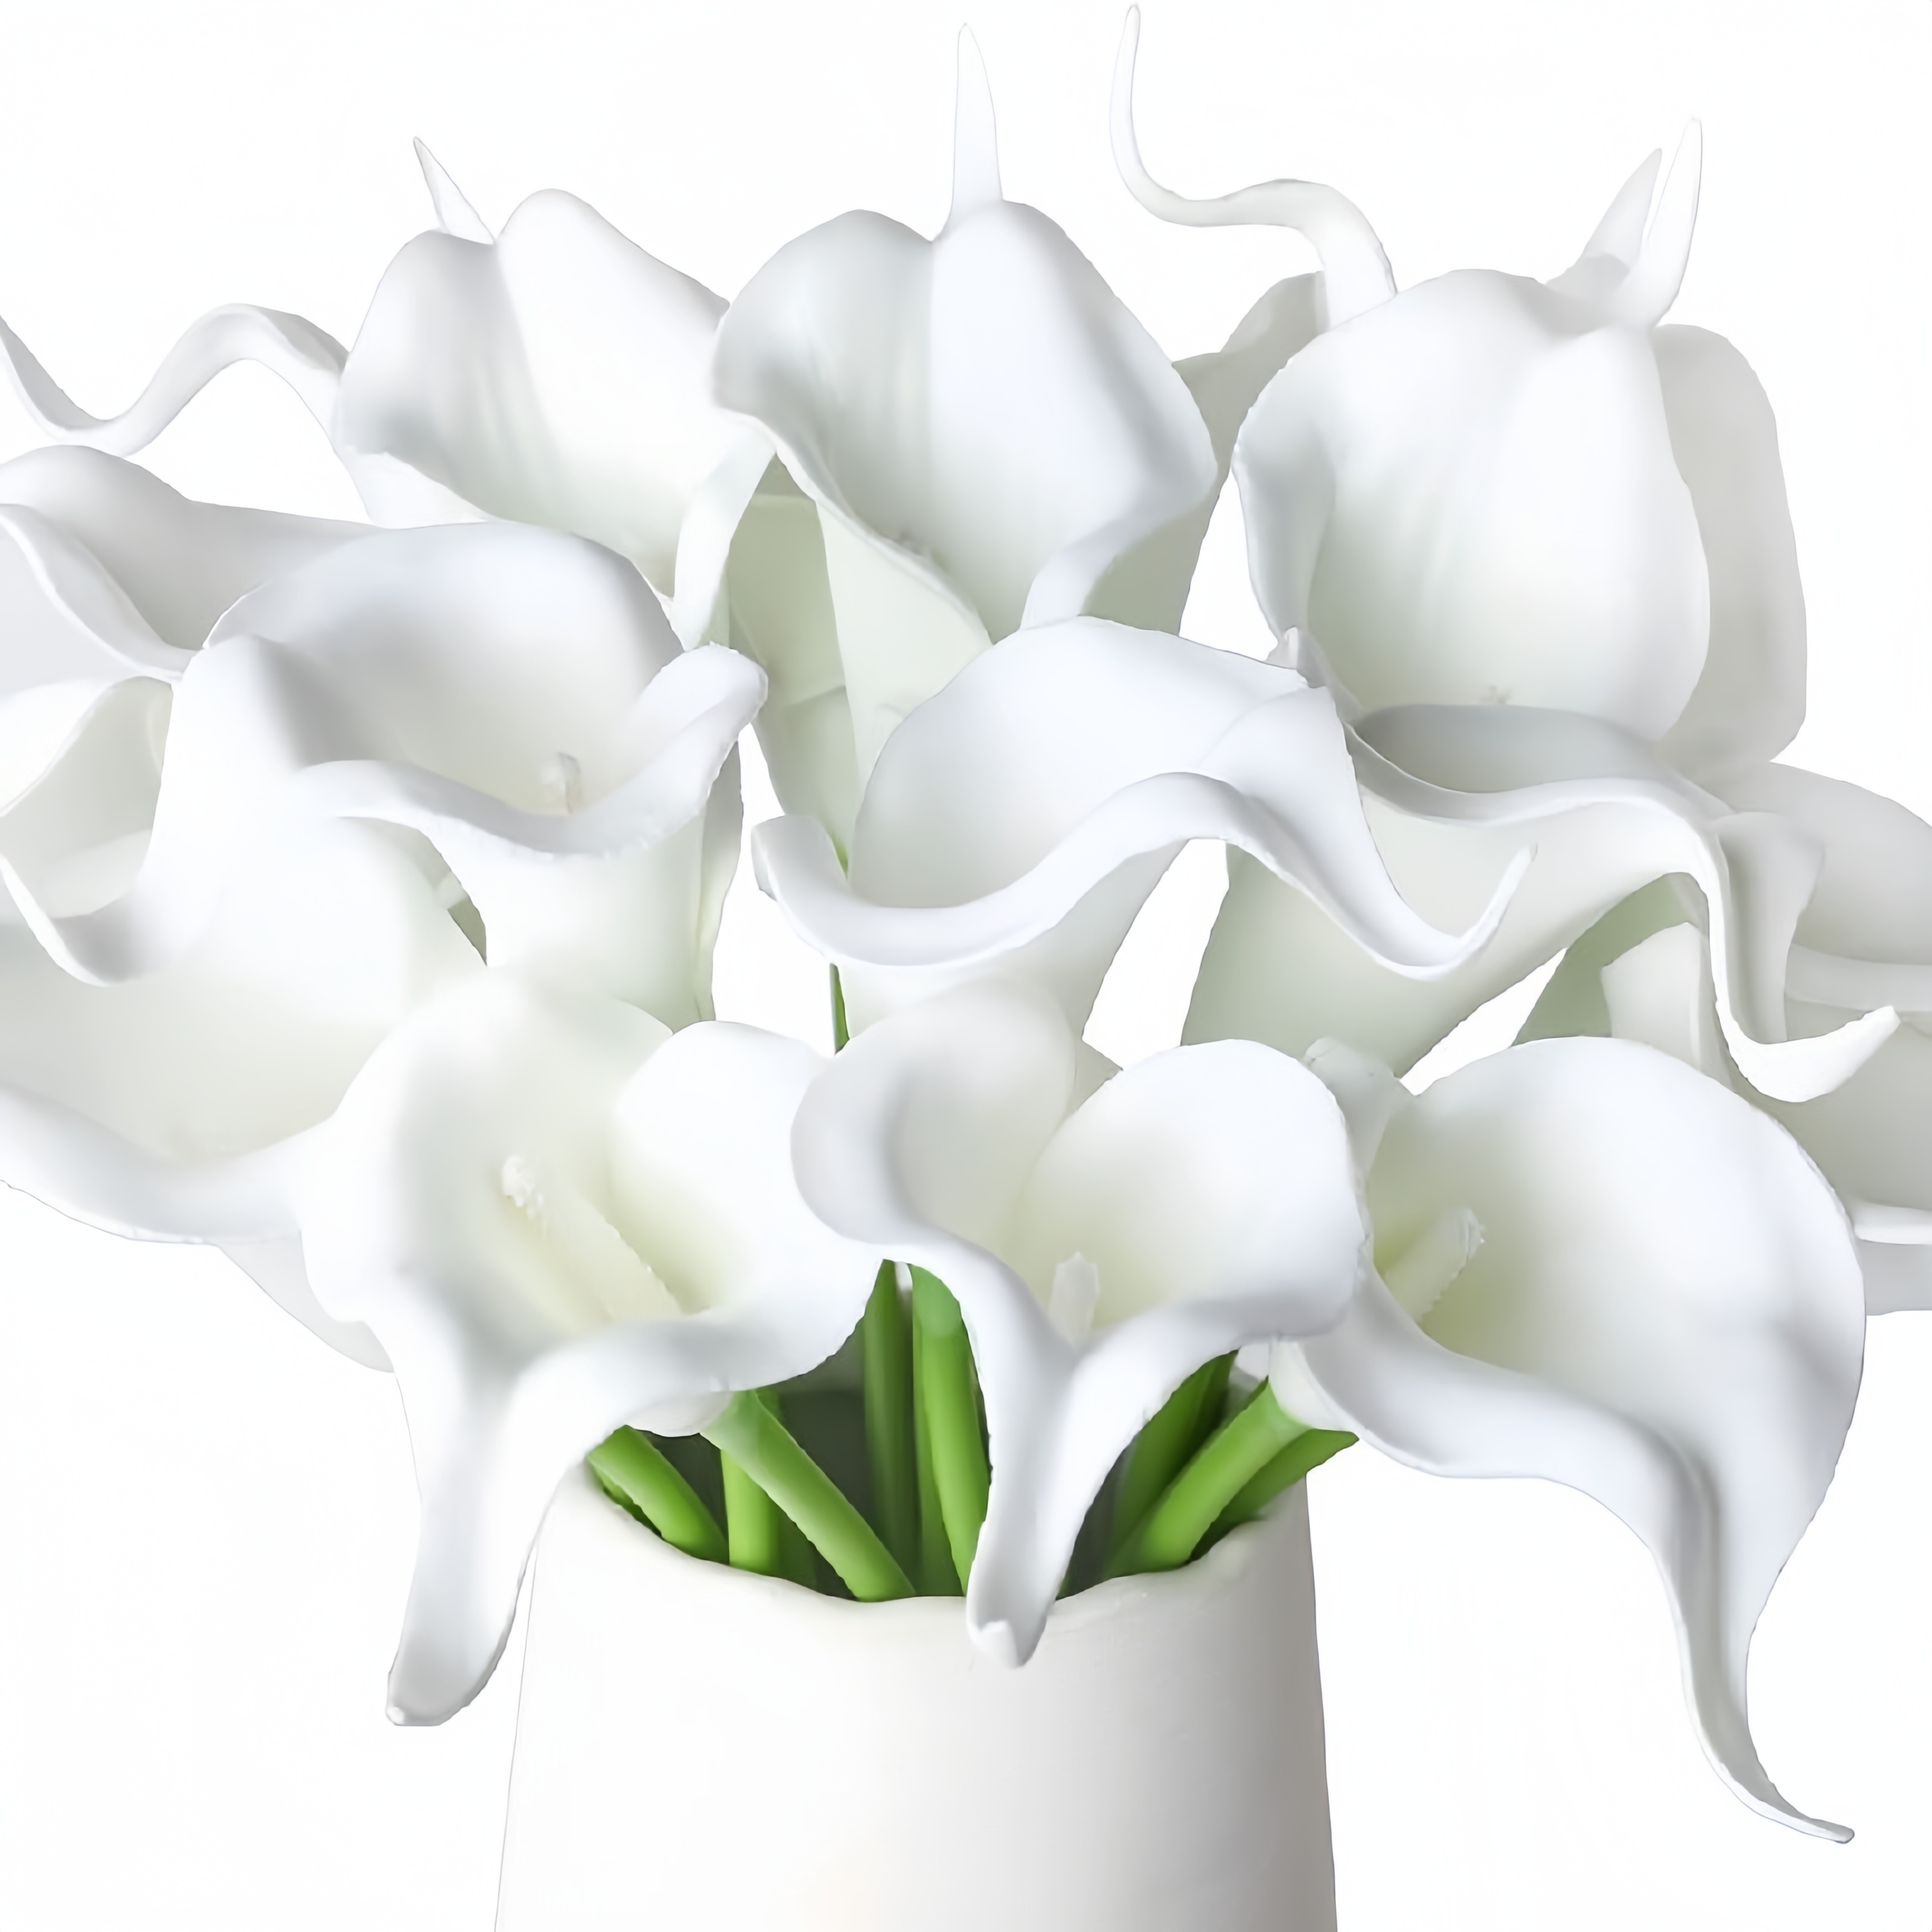 

5 Pcs Artificial Calla Lily Flowers - Real Touch Latex For Diy Wedding Bouquets, Party Decor, Home Accents